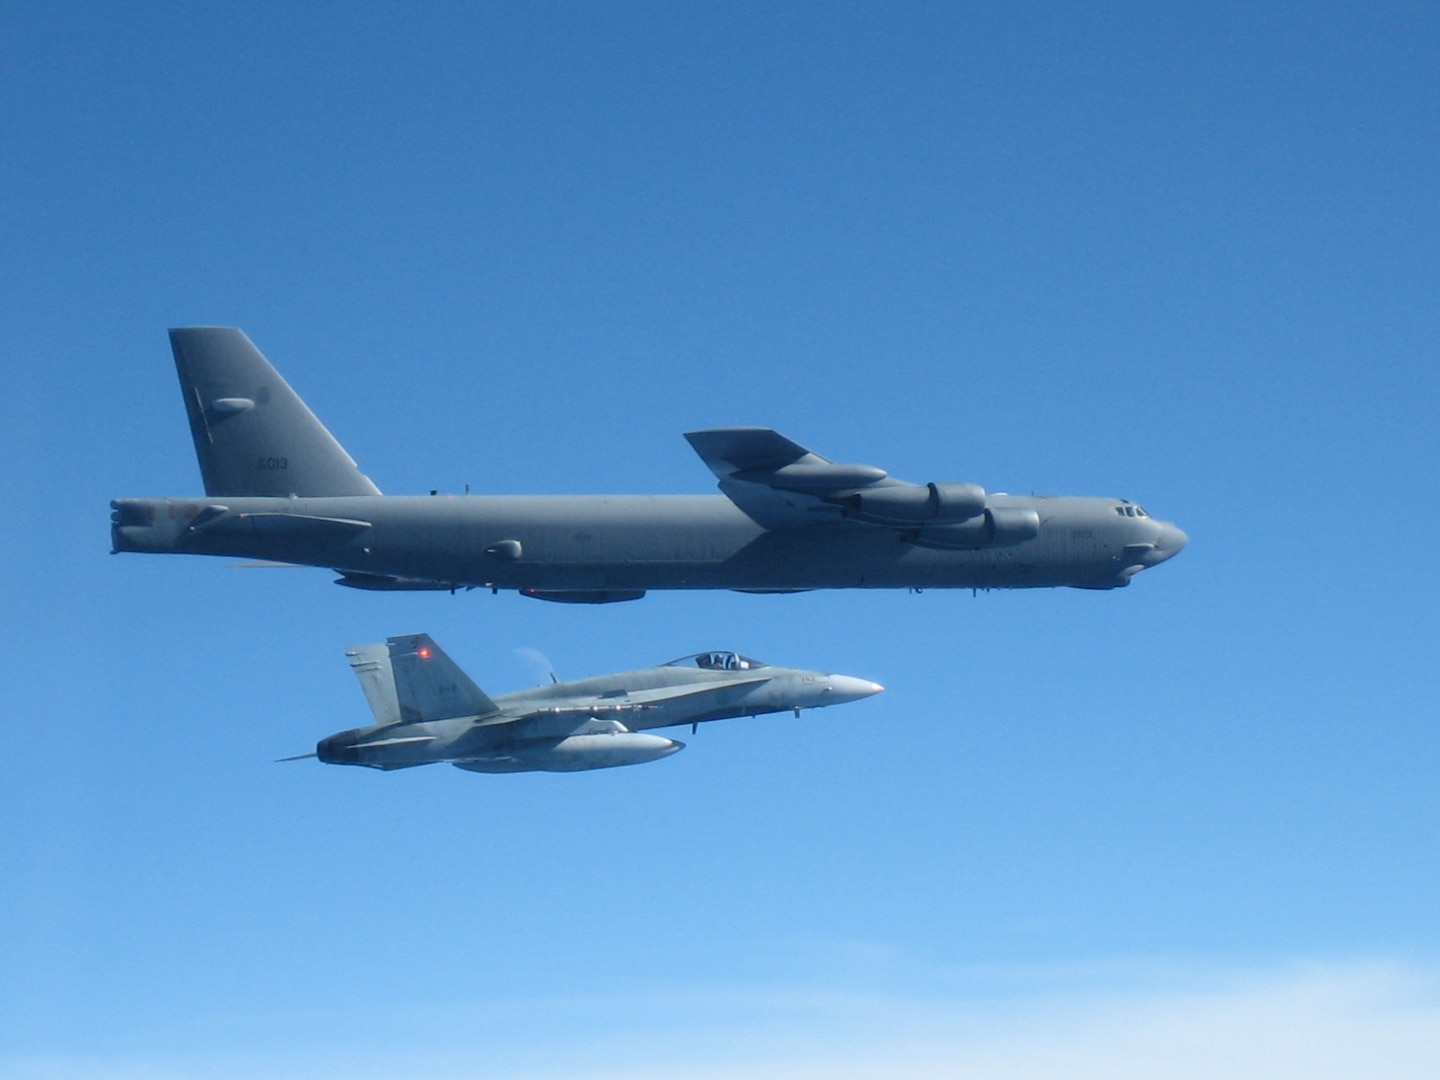 A CF-18 Hornet supporting the Canadian NORAD Region escorts a US Air Force B-52.  The aircraft participated in Exercise Amalgam Dart on September 18, which included aircraft from the Canadian and the Continental US NORAD Regions. Photo by Capt. Corey Mask 